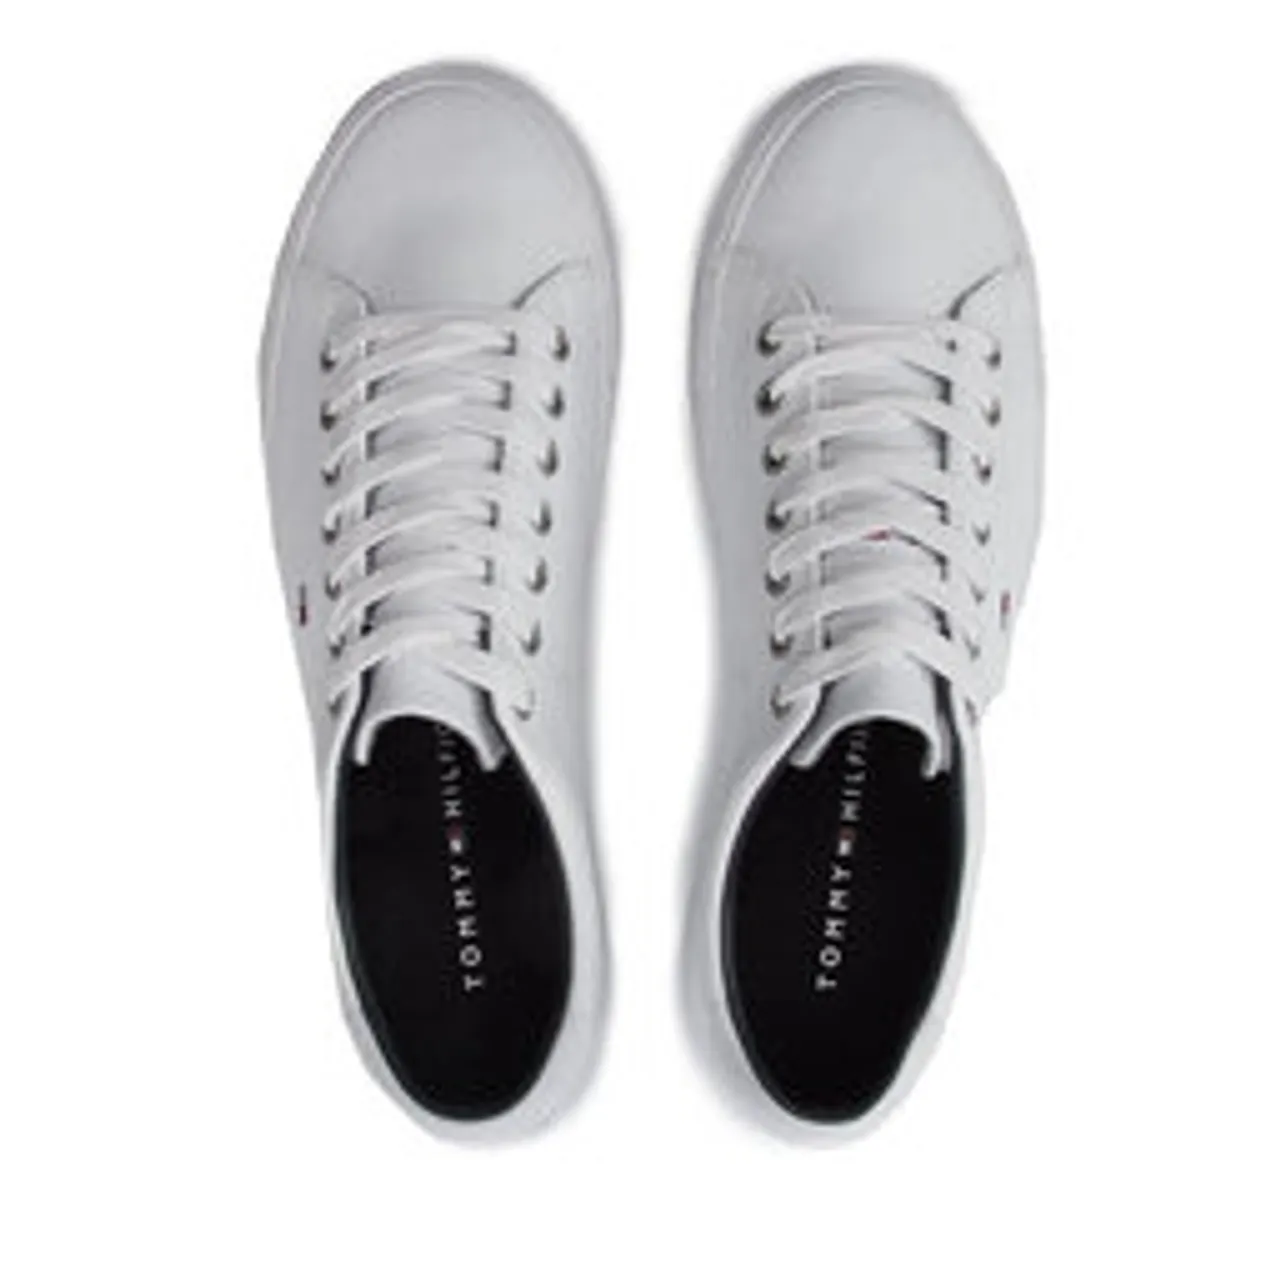 Sneakers Tommy Hilfiger Essential Leather Sneaker FM0FM02157 White 100